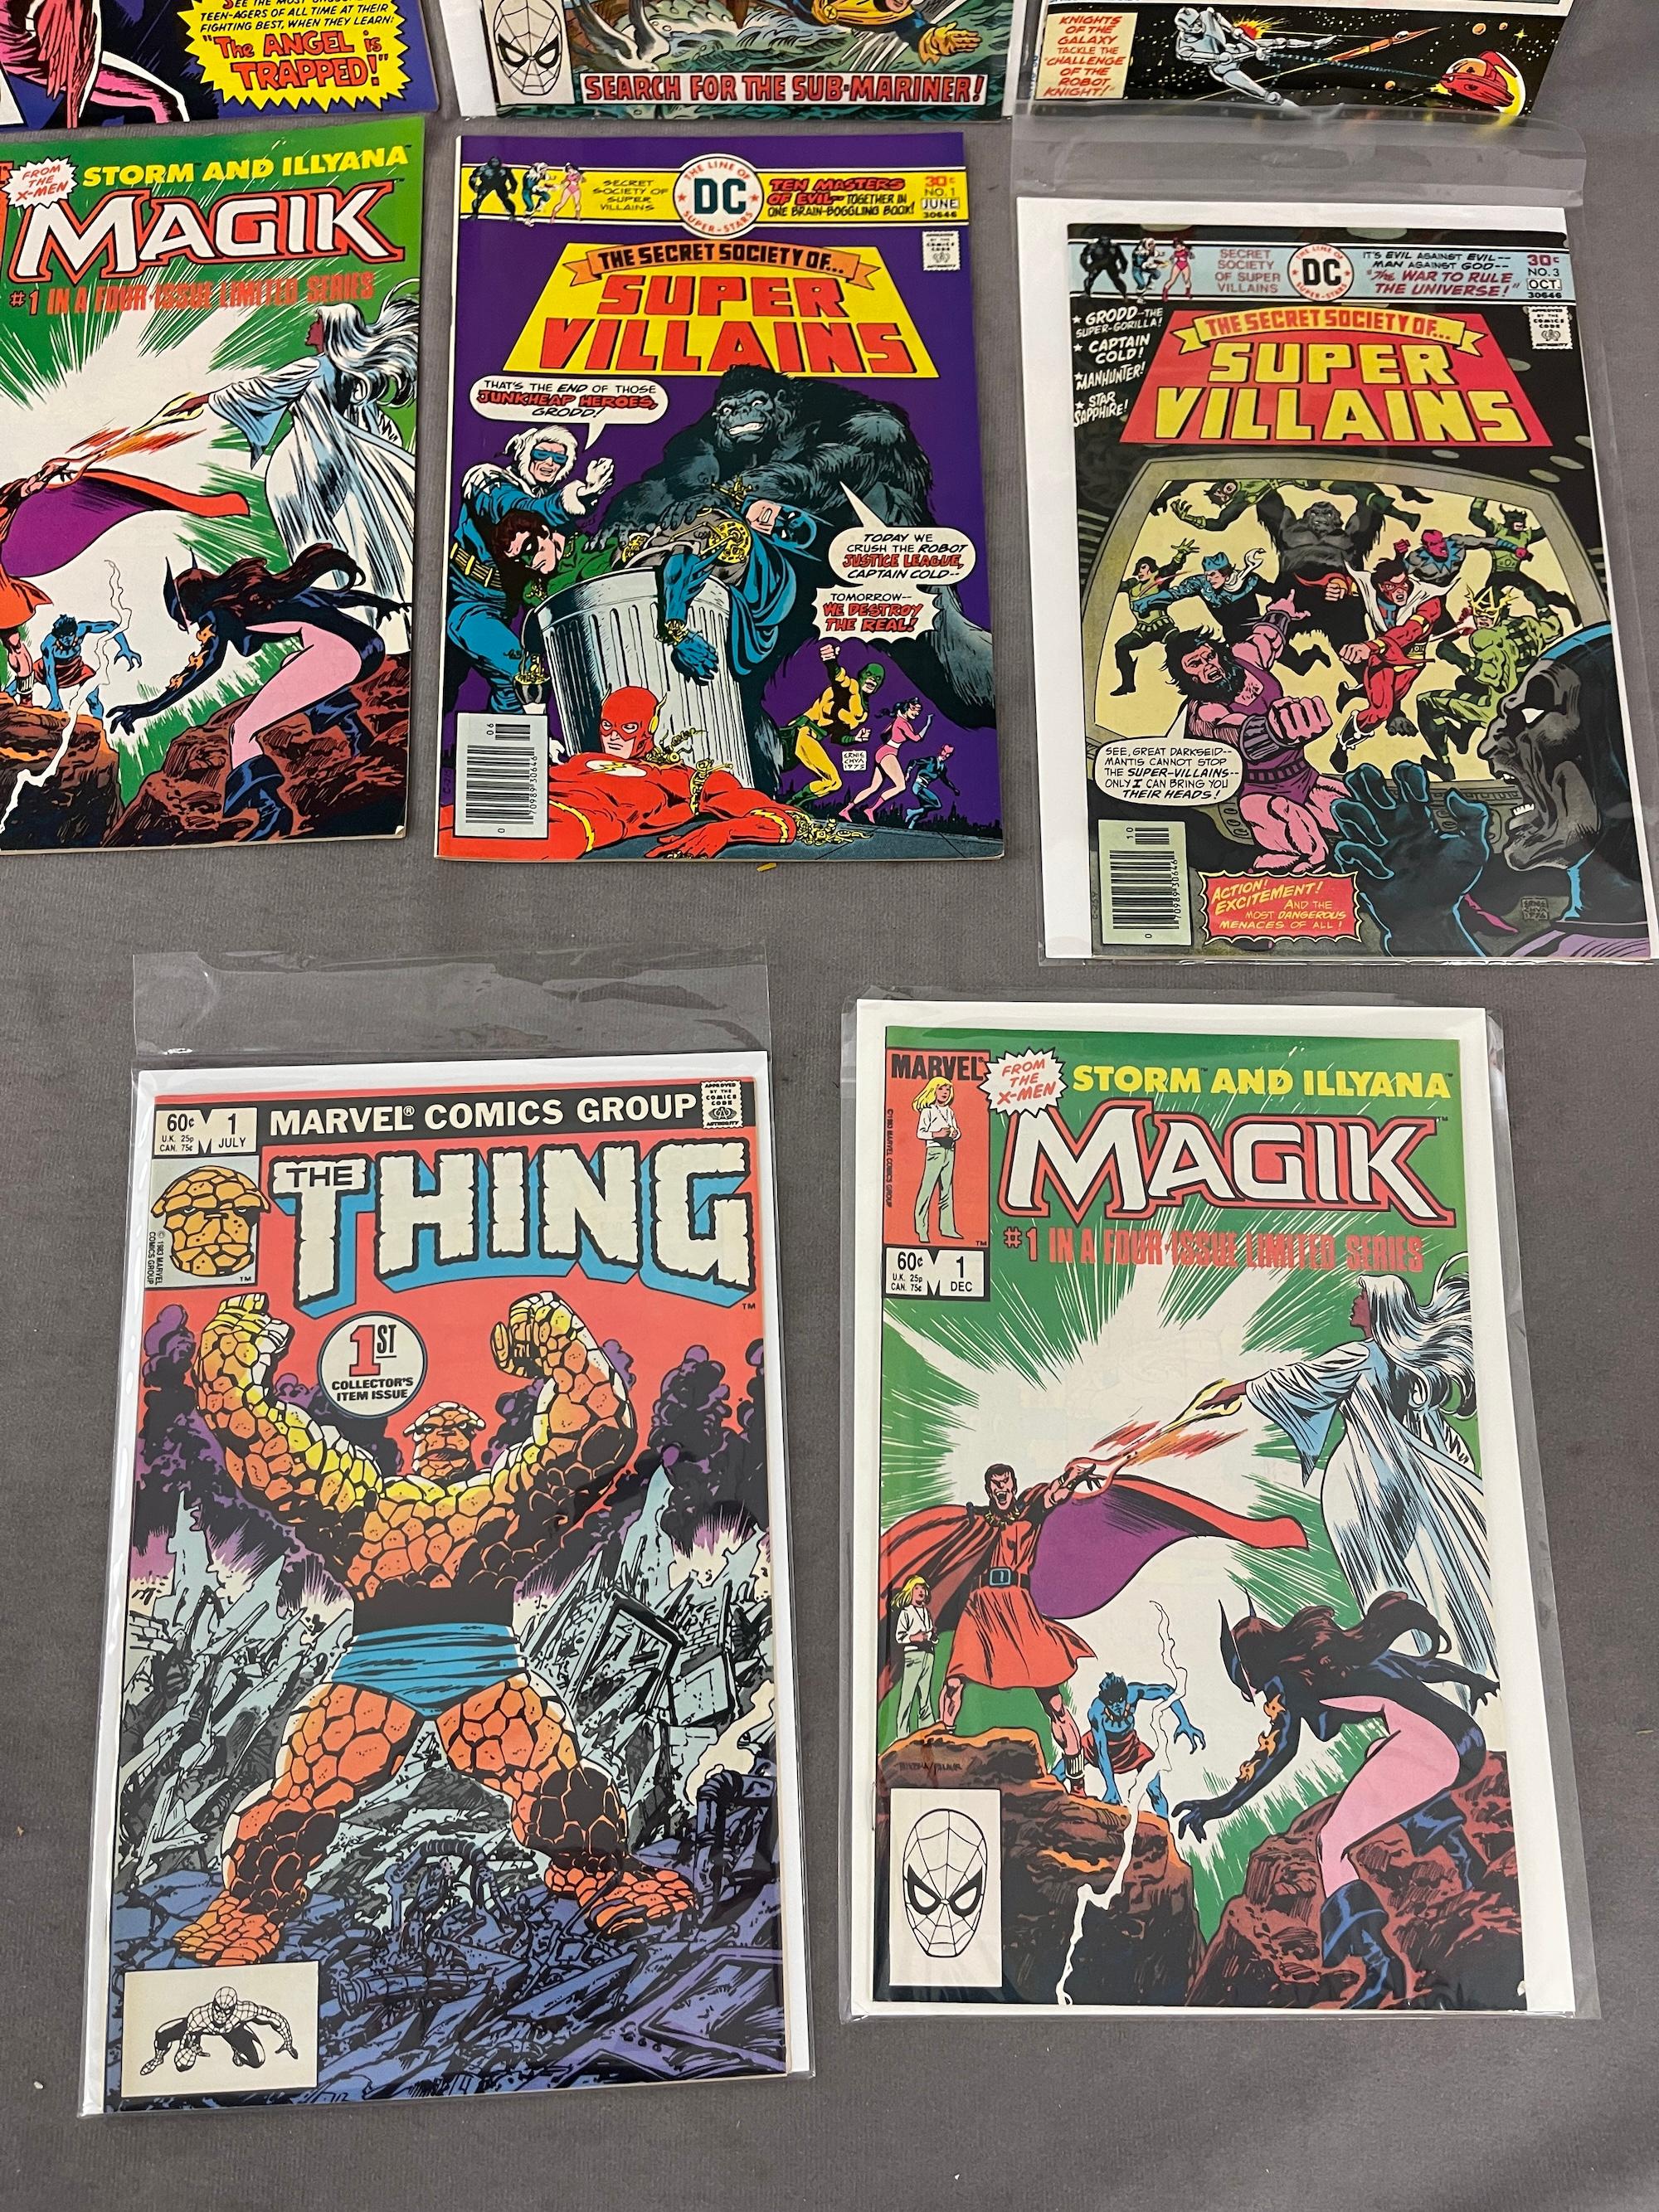 VINTAGE COMIC BOOK COLLECTION THING X-MEN LOT 8